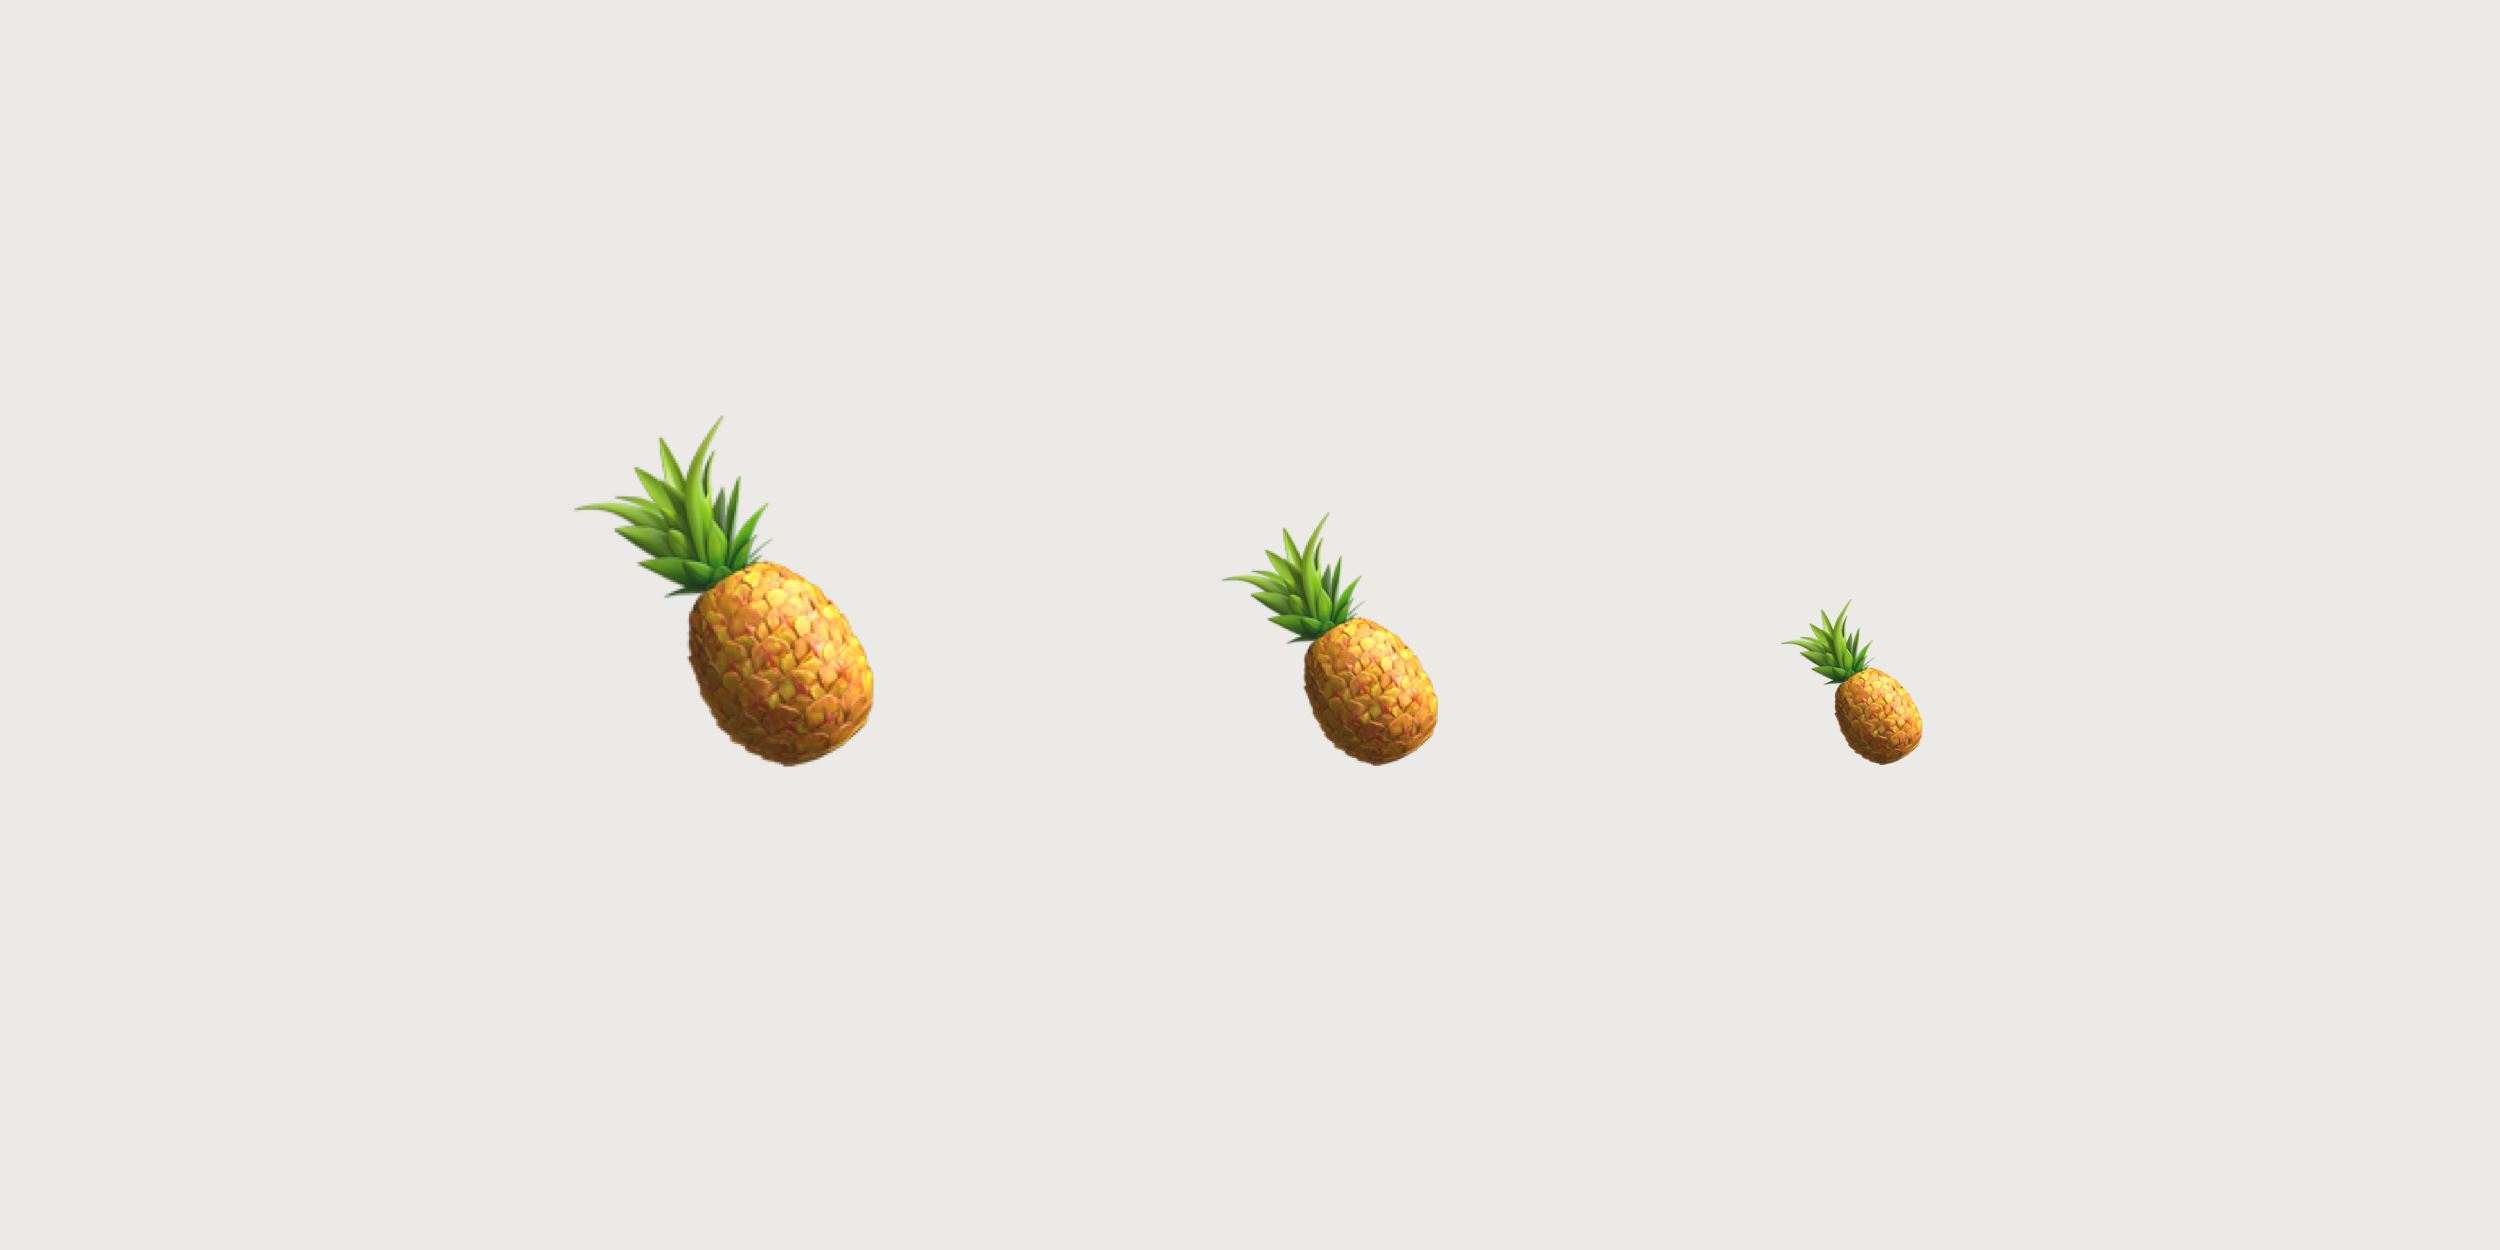 Three pineapple images of varying size